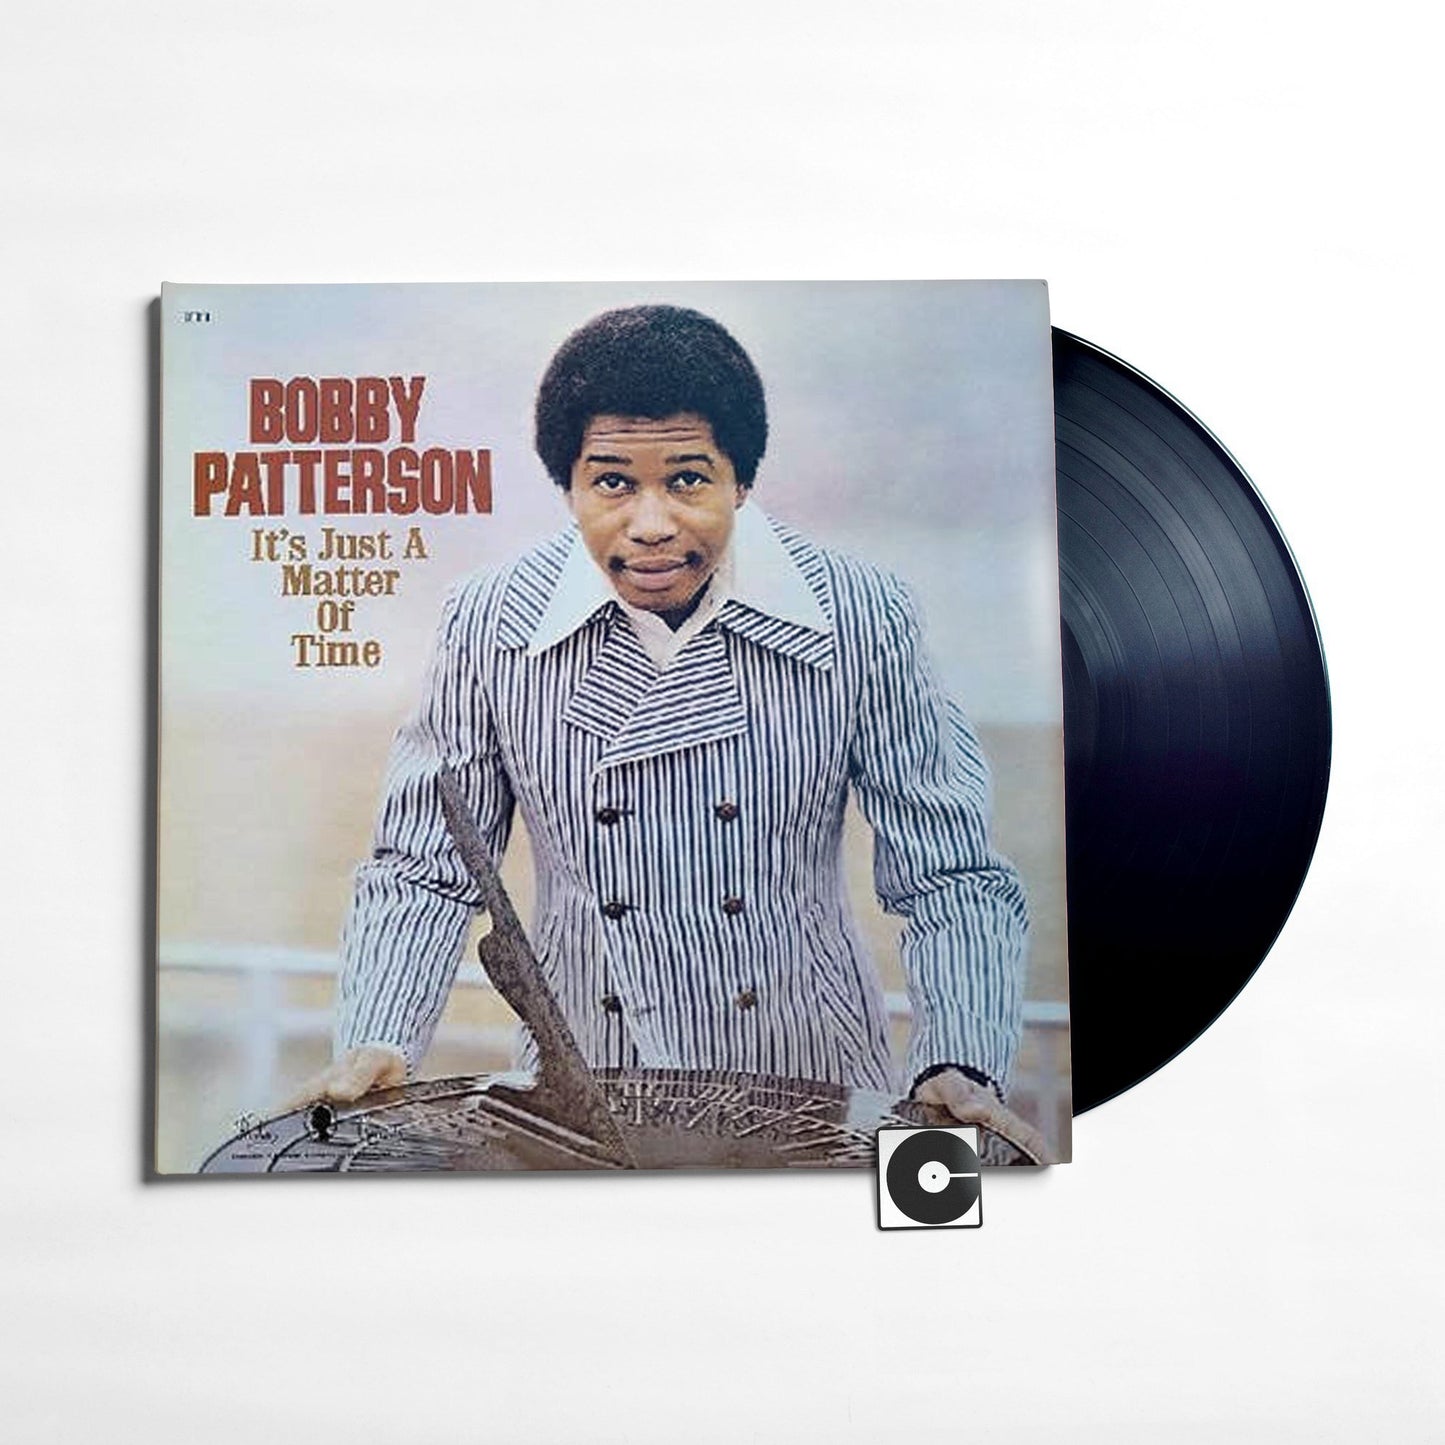 Bobby Patterson - "It's Just A Matter Of Time"